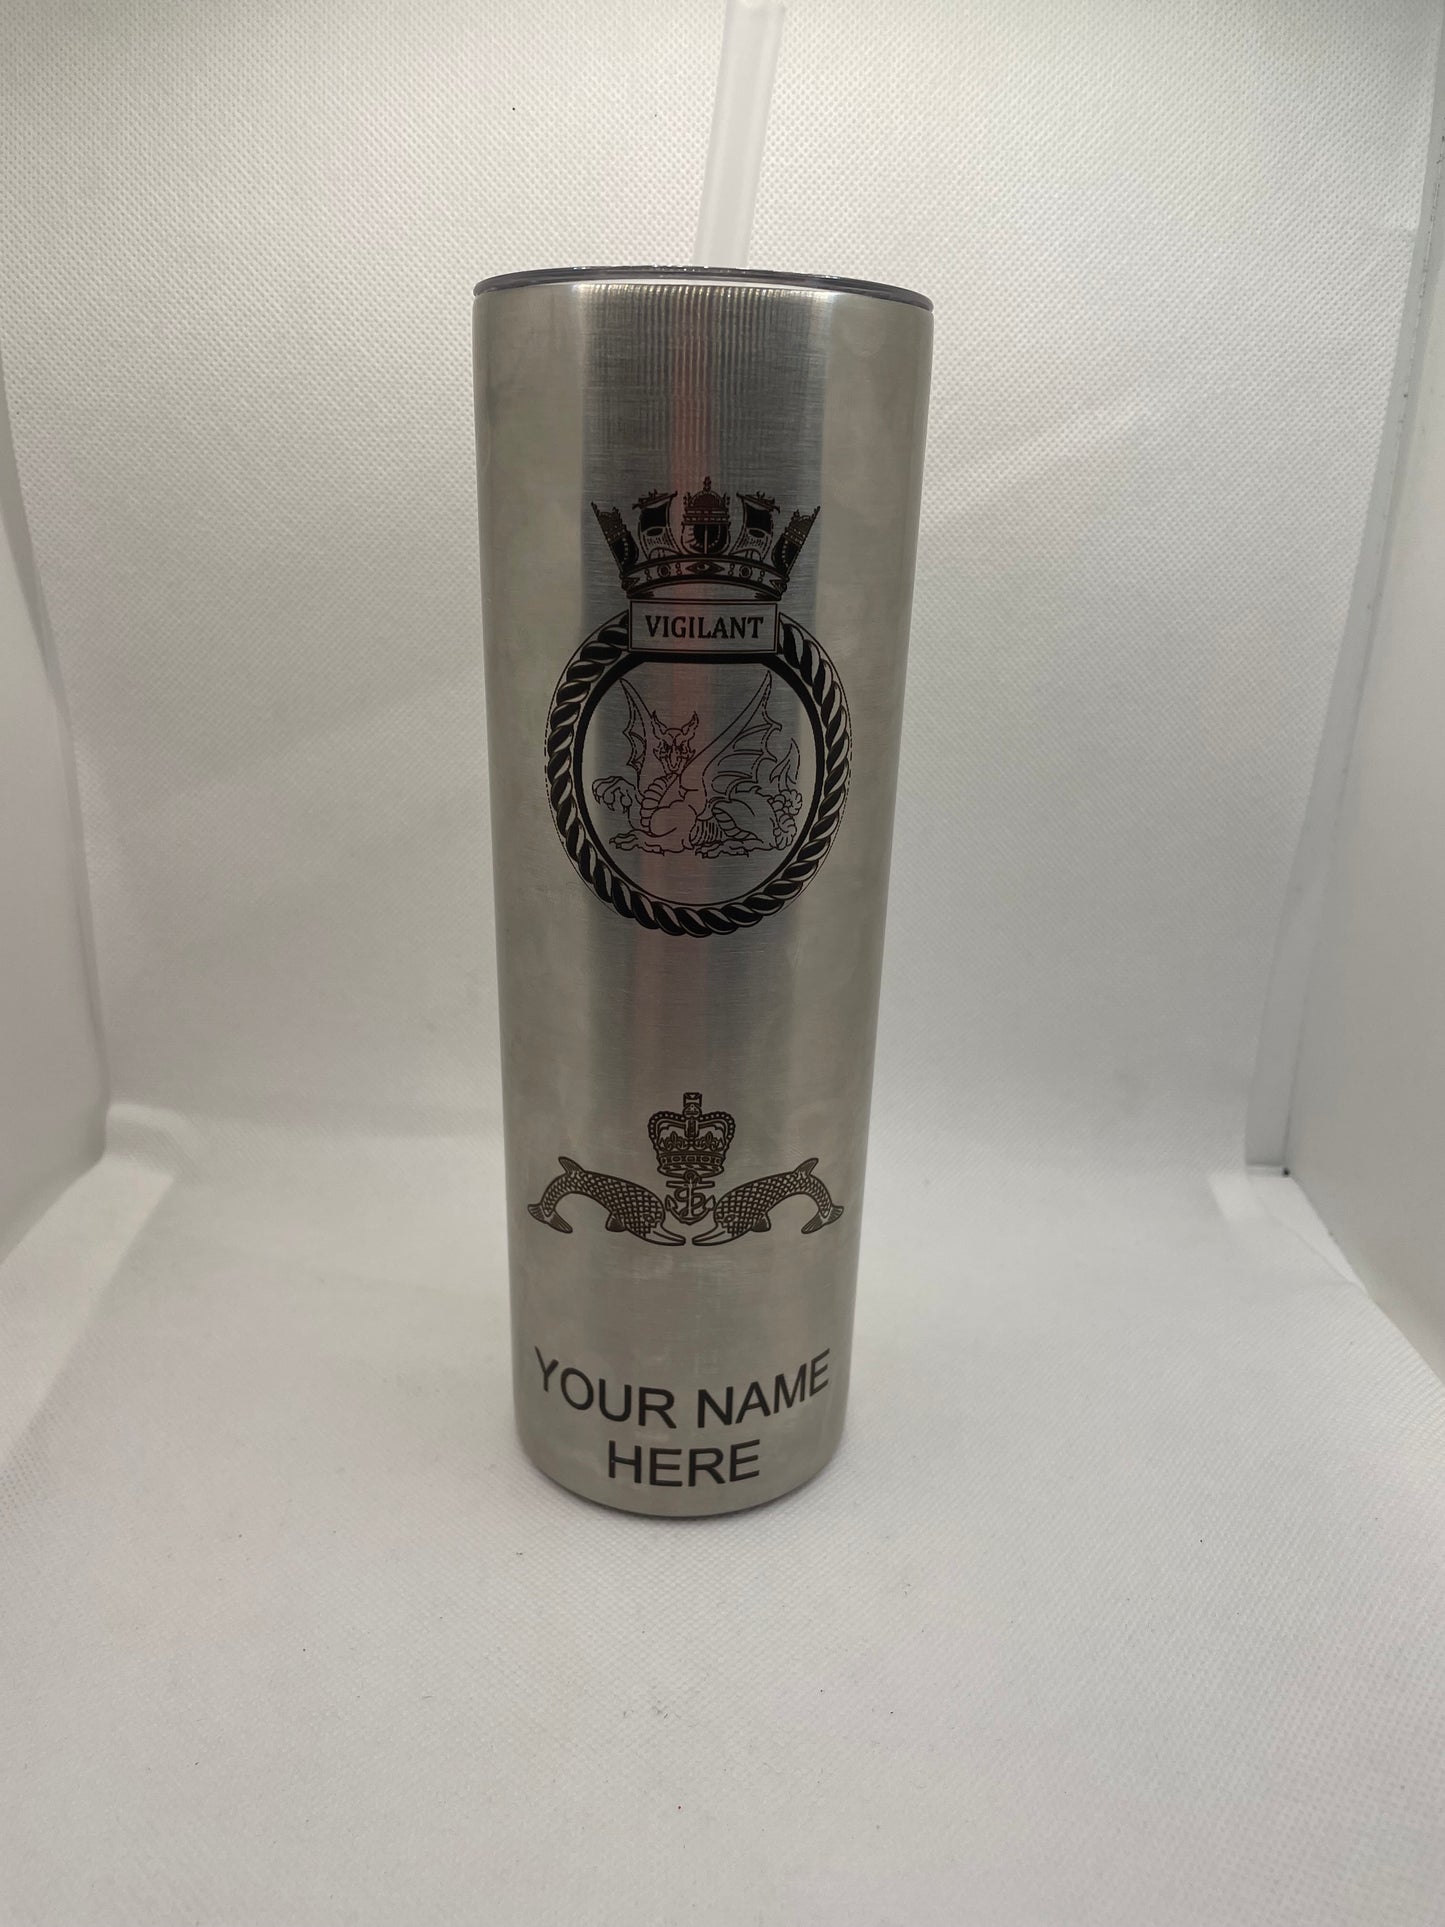 Royal Navy Crest Engraved Tumbler - Any Crest Available